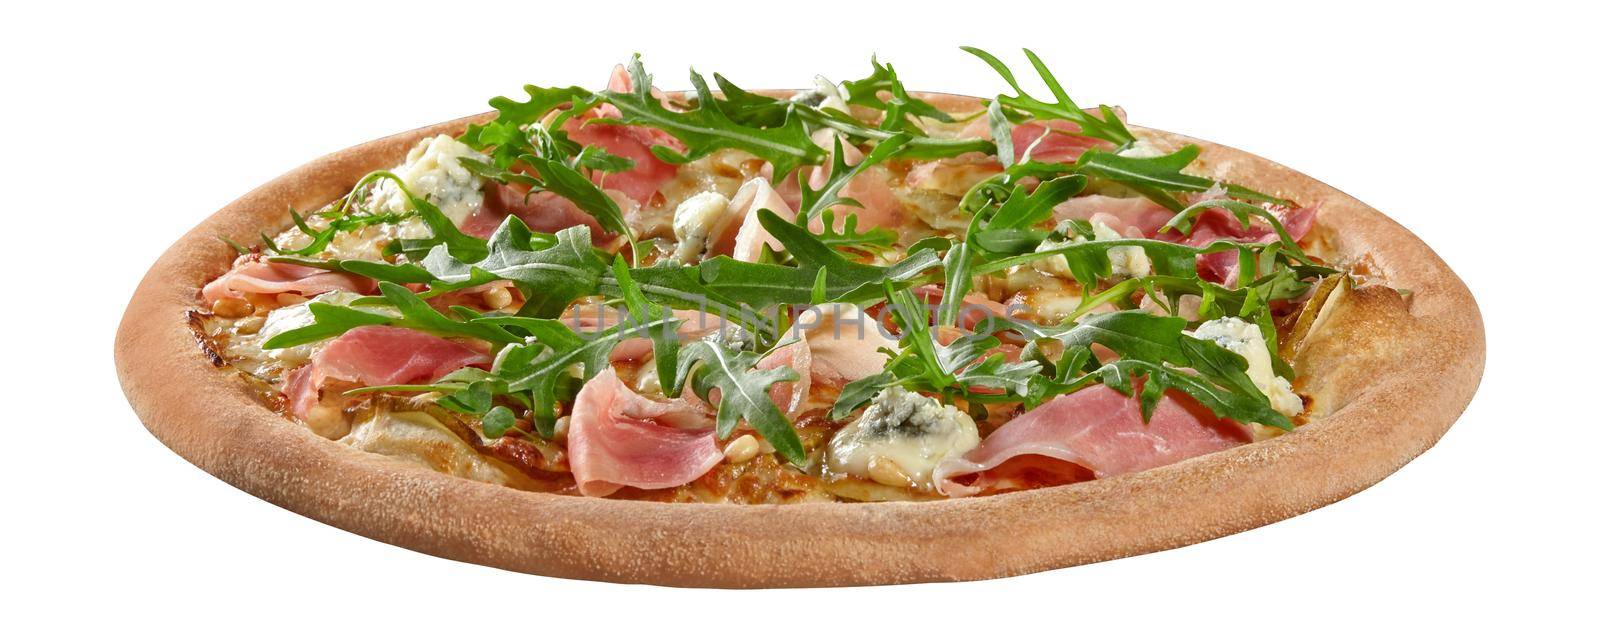 Piquant Pinoli pizza with cheese and cream sauce, mozzarella, prosciutto slices and gorgonzola combined with ripe pears and slightly roasted pine nuts garnished with arugula. Italian cuisine